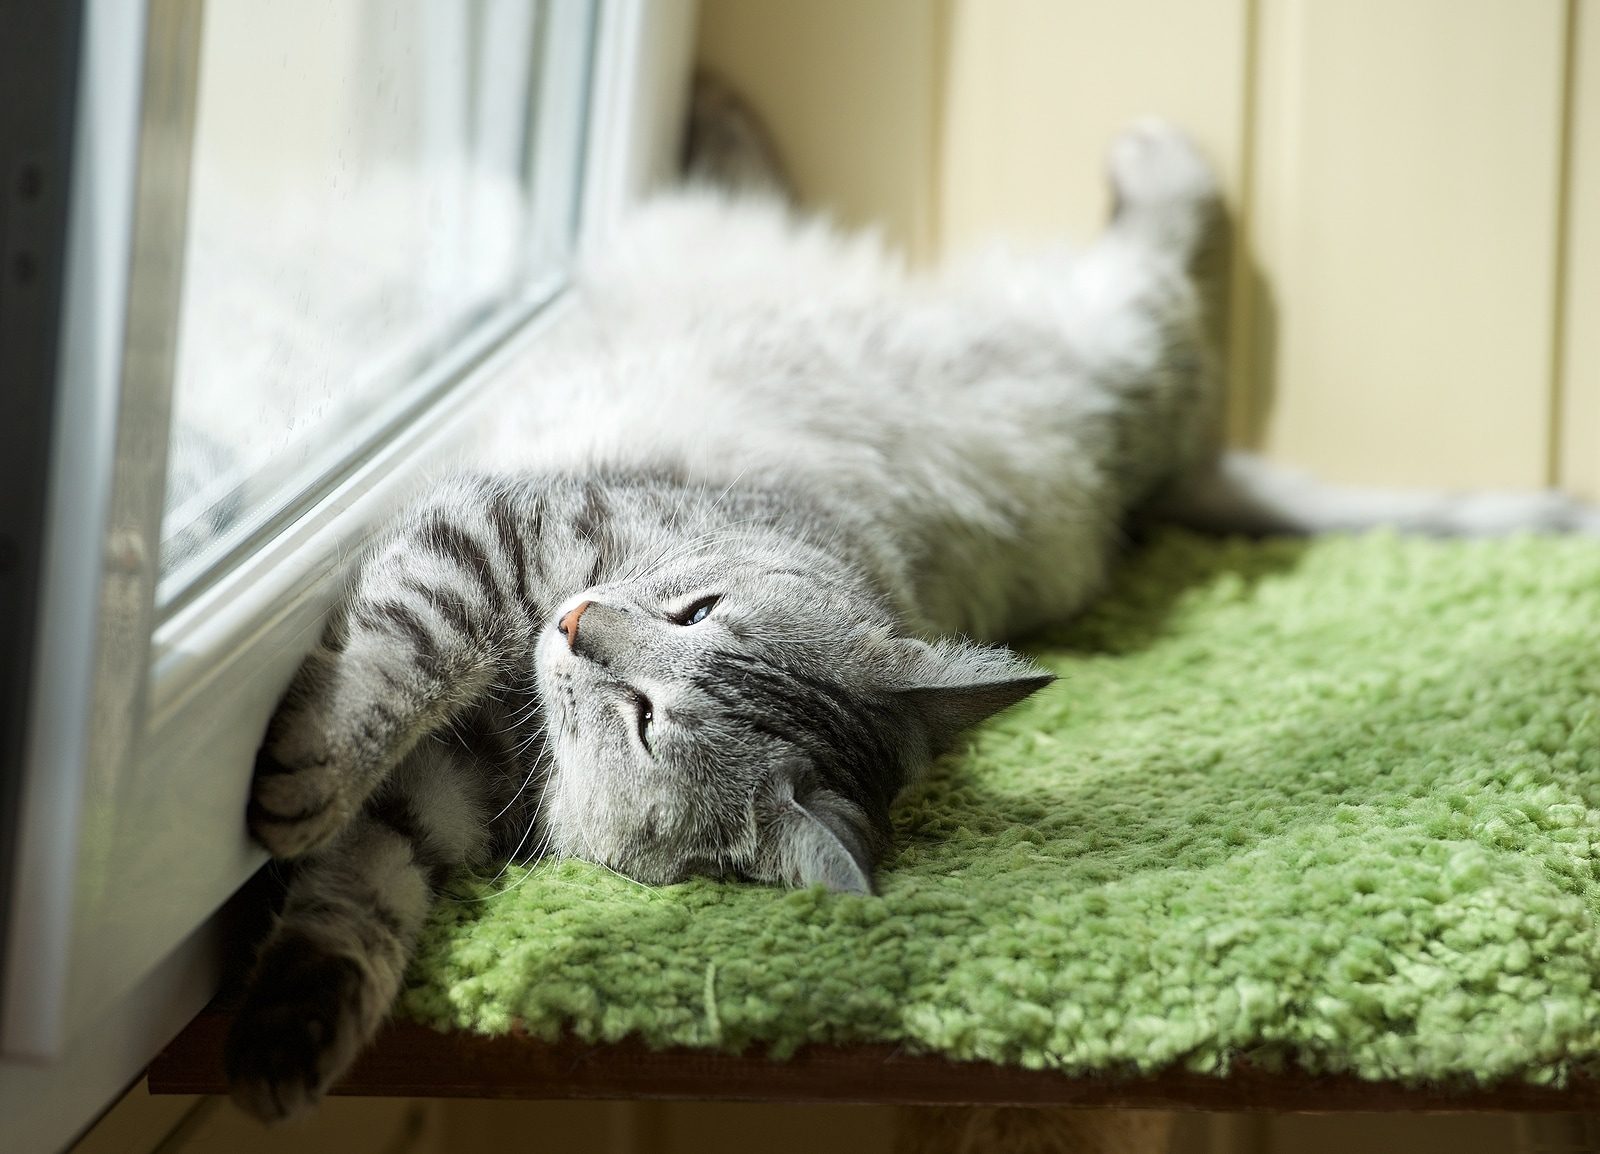 Do cats sweat or pant in hot weather?